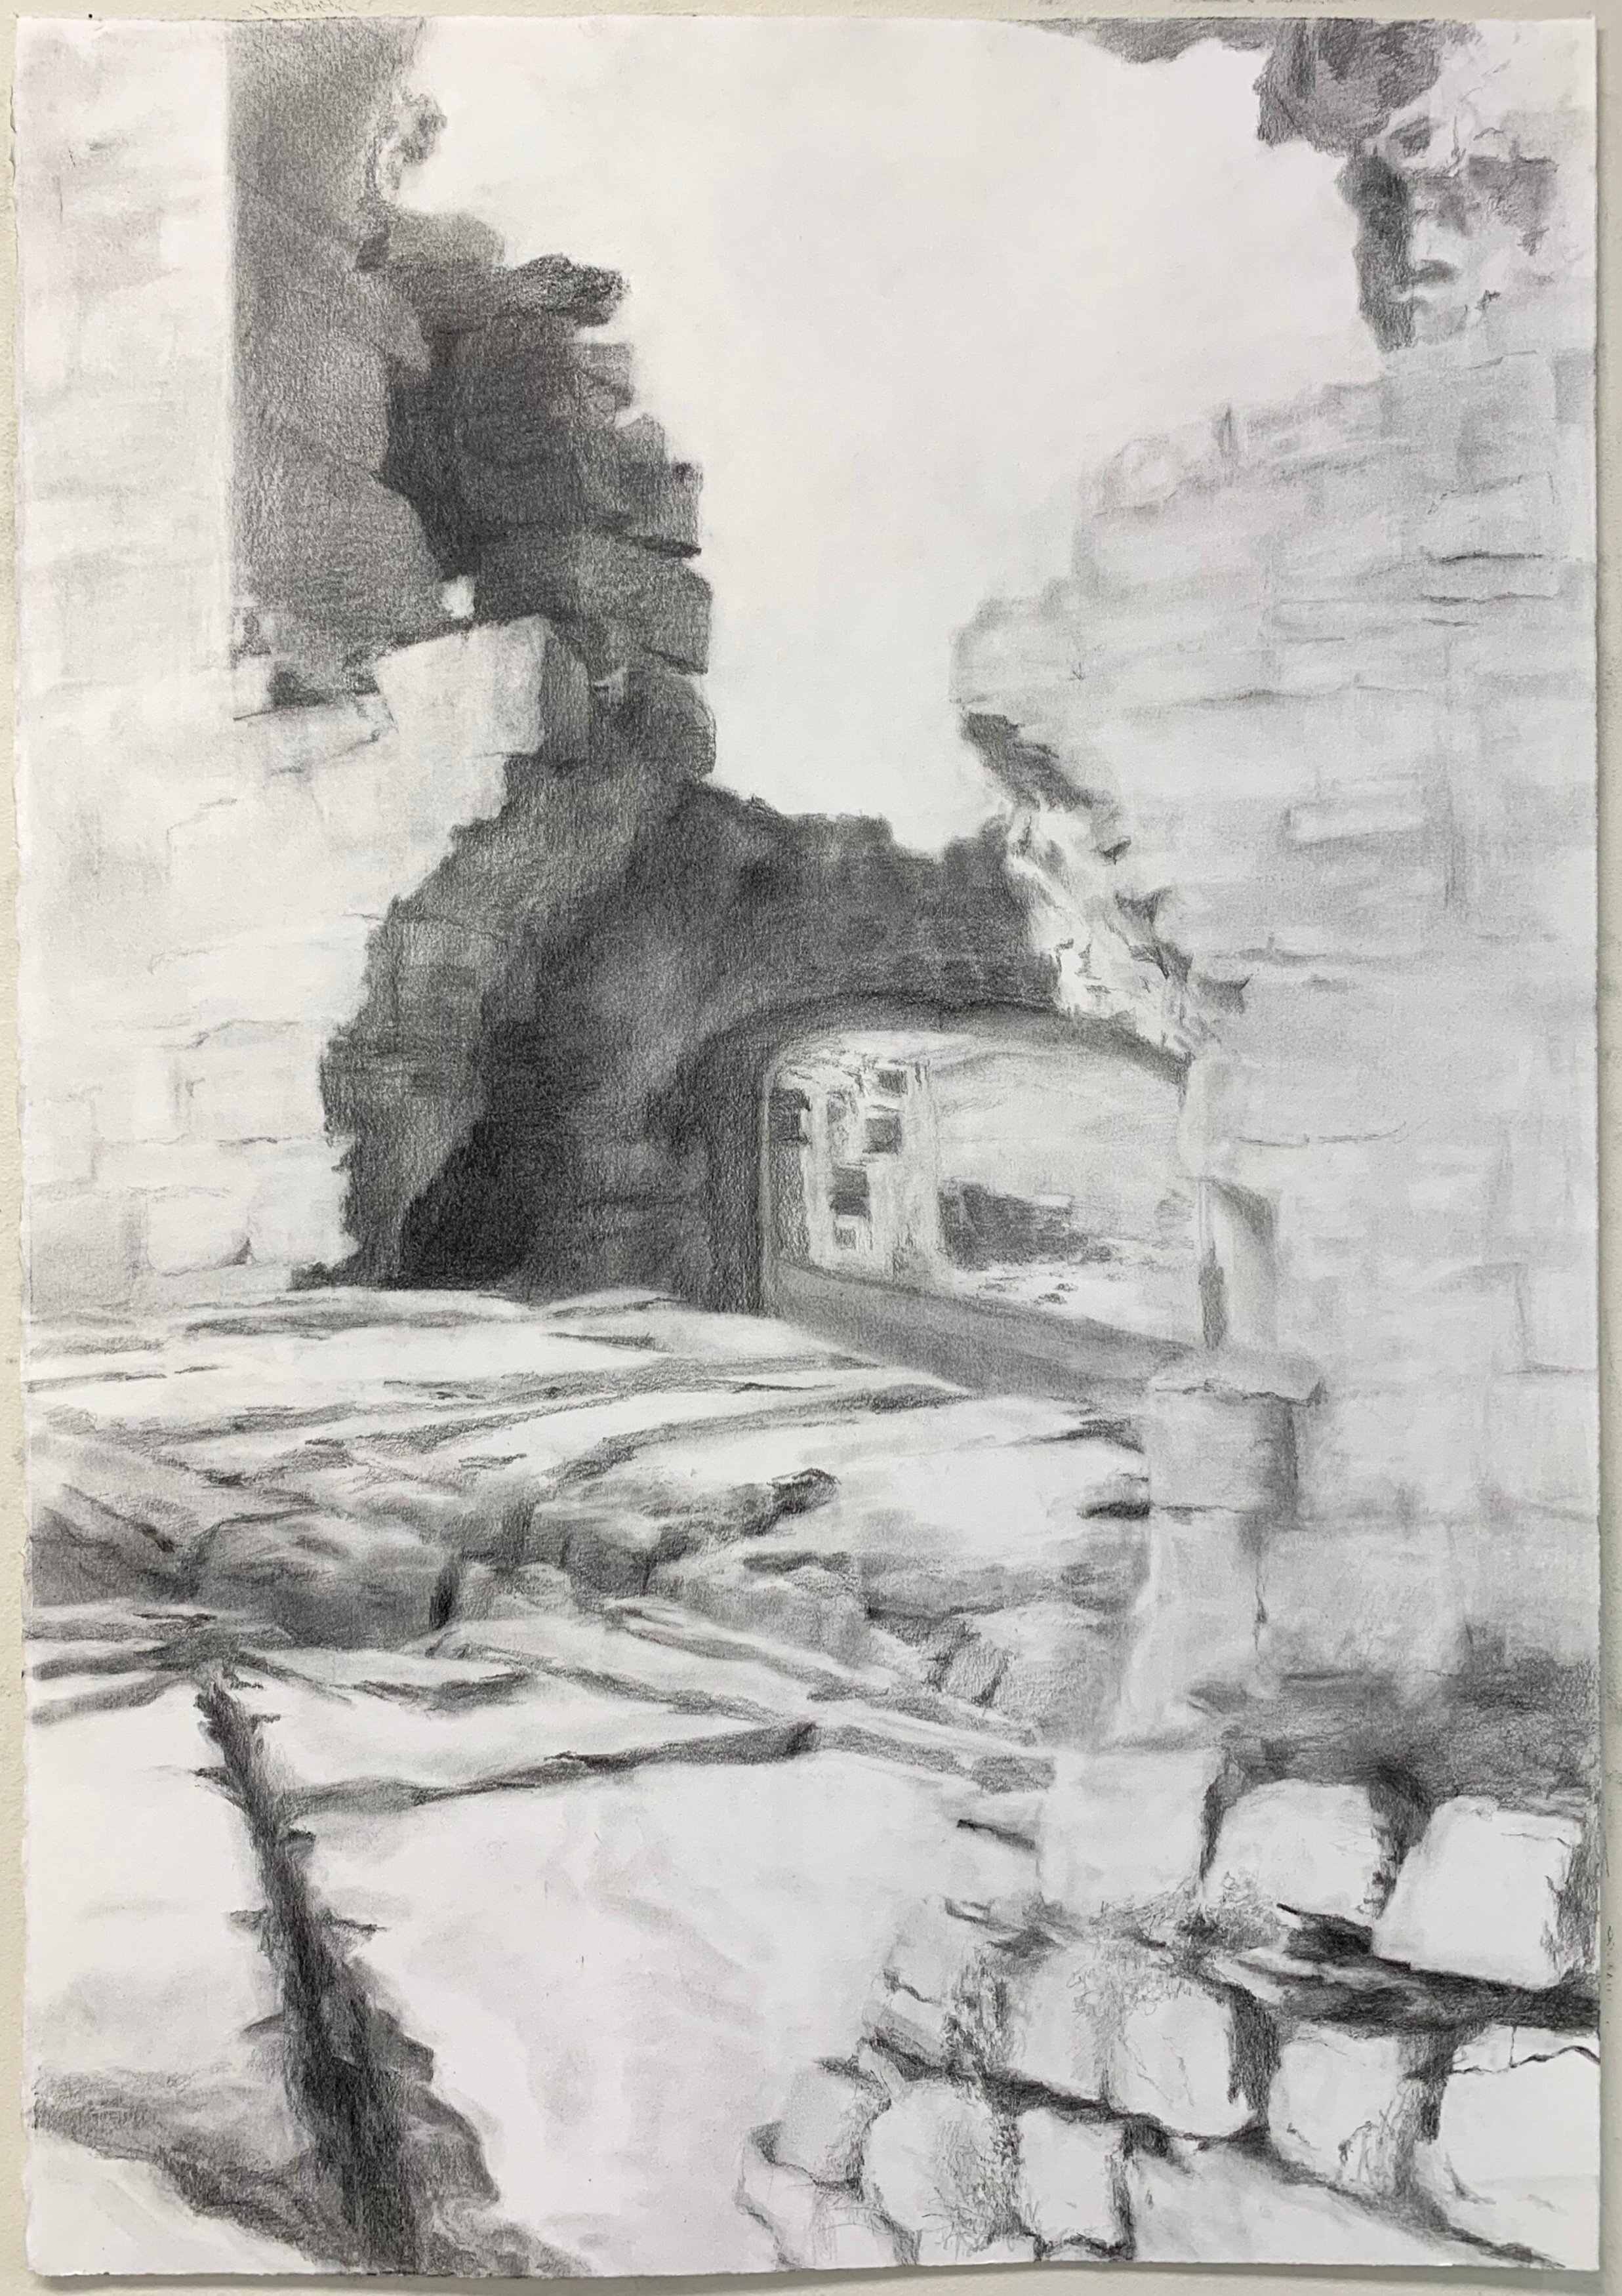   Dunamase 3,  2019 graphite on paper, 30 x 22 in 